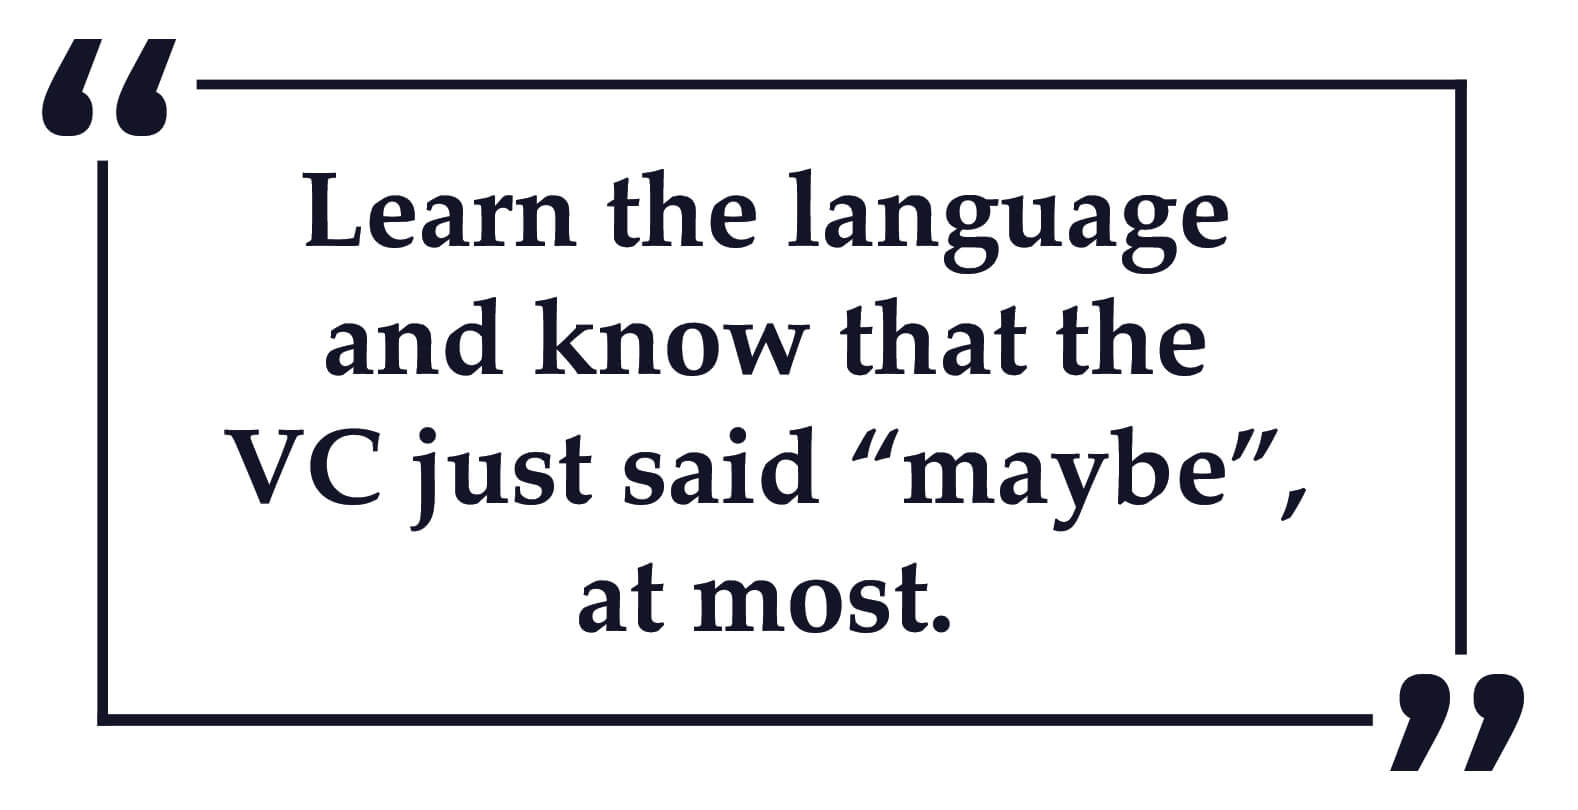 Learn the language and know that the VC just said maybe, at most. Gigi Levy-Weiss